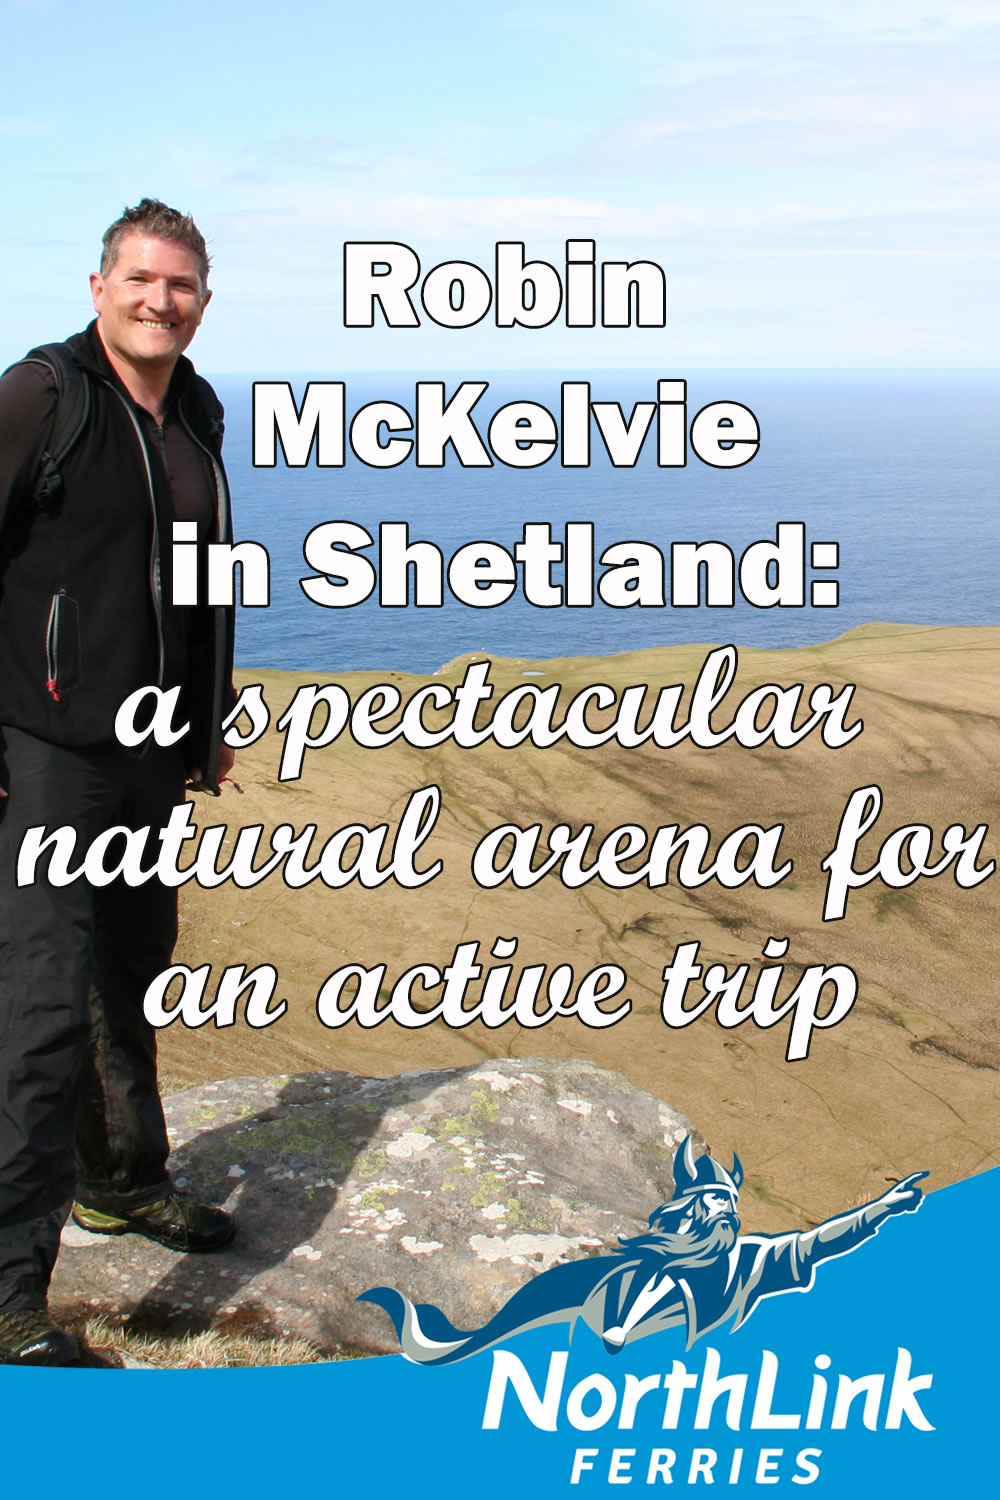 Robin McKelvie in Shetland: A spectacular natural arena for an active trip